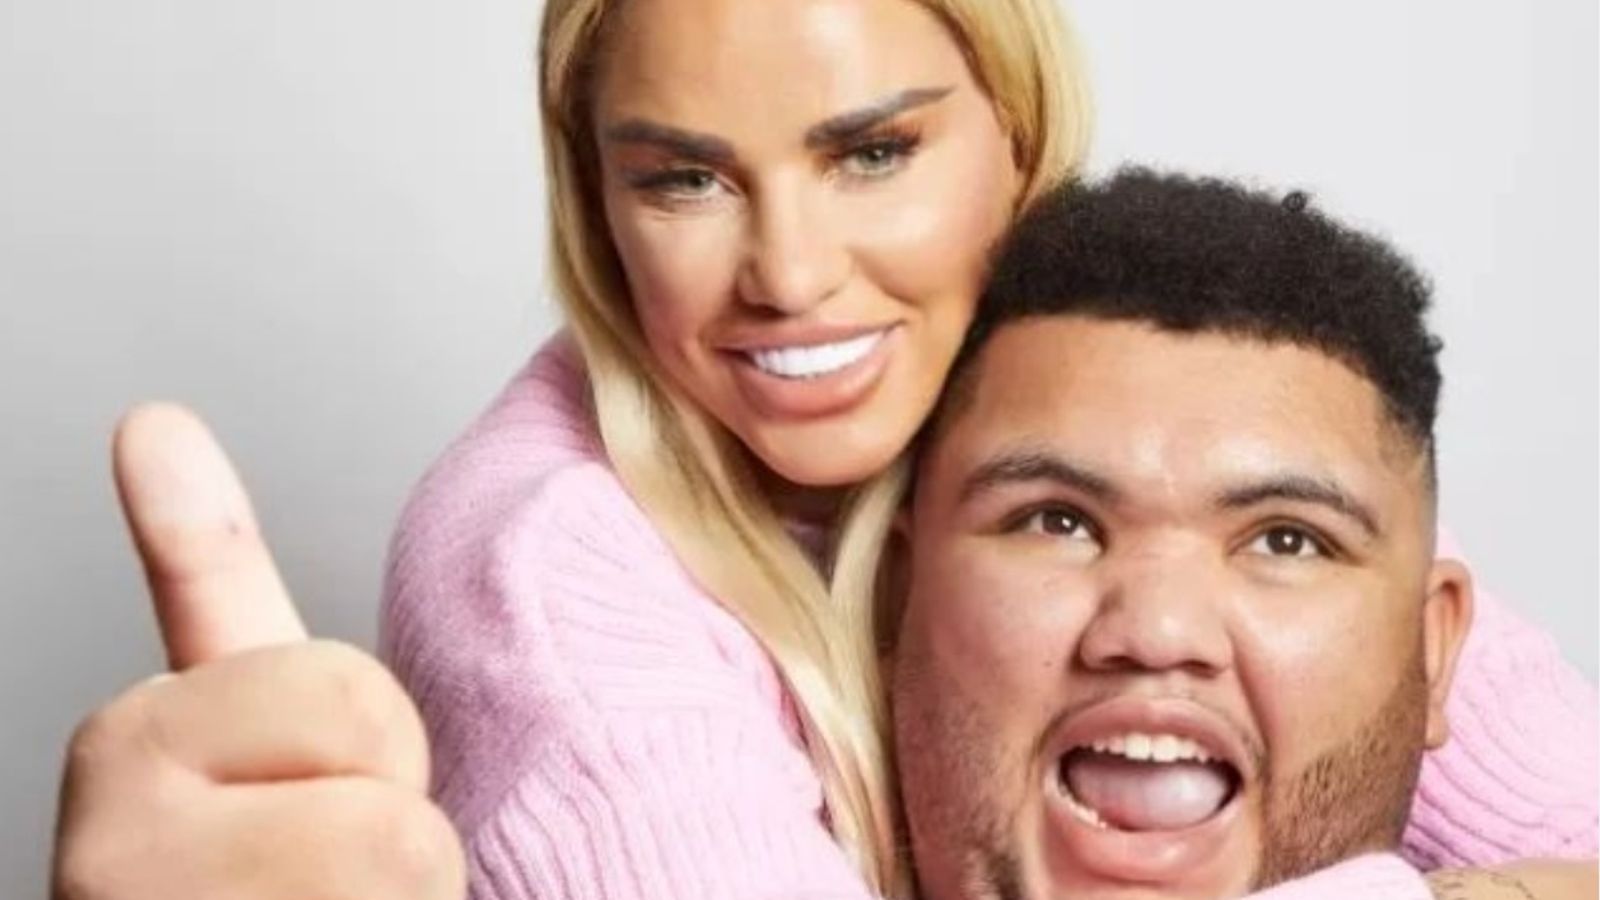 Met Police officers allegedly sent 'inappropriate images' of Katie Price's son via WhatsApp group